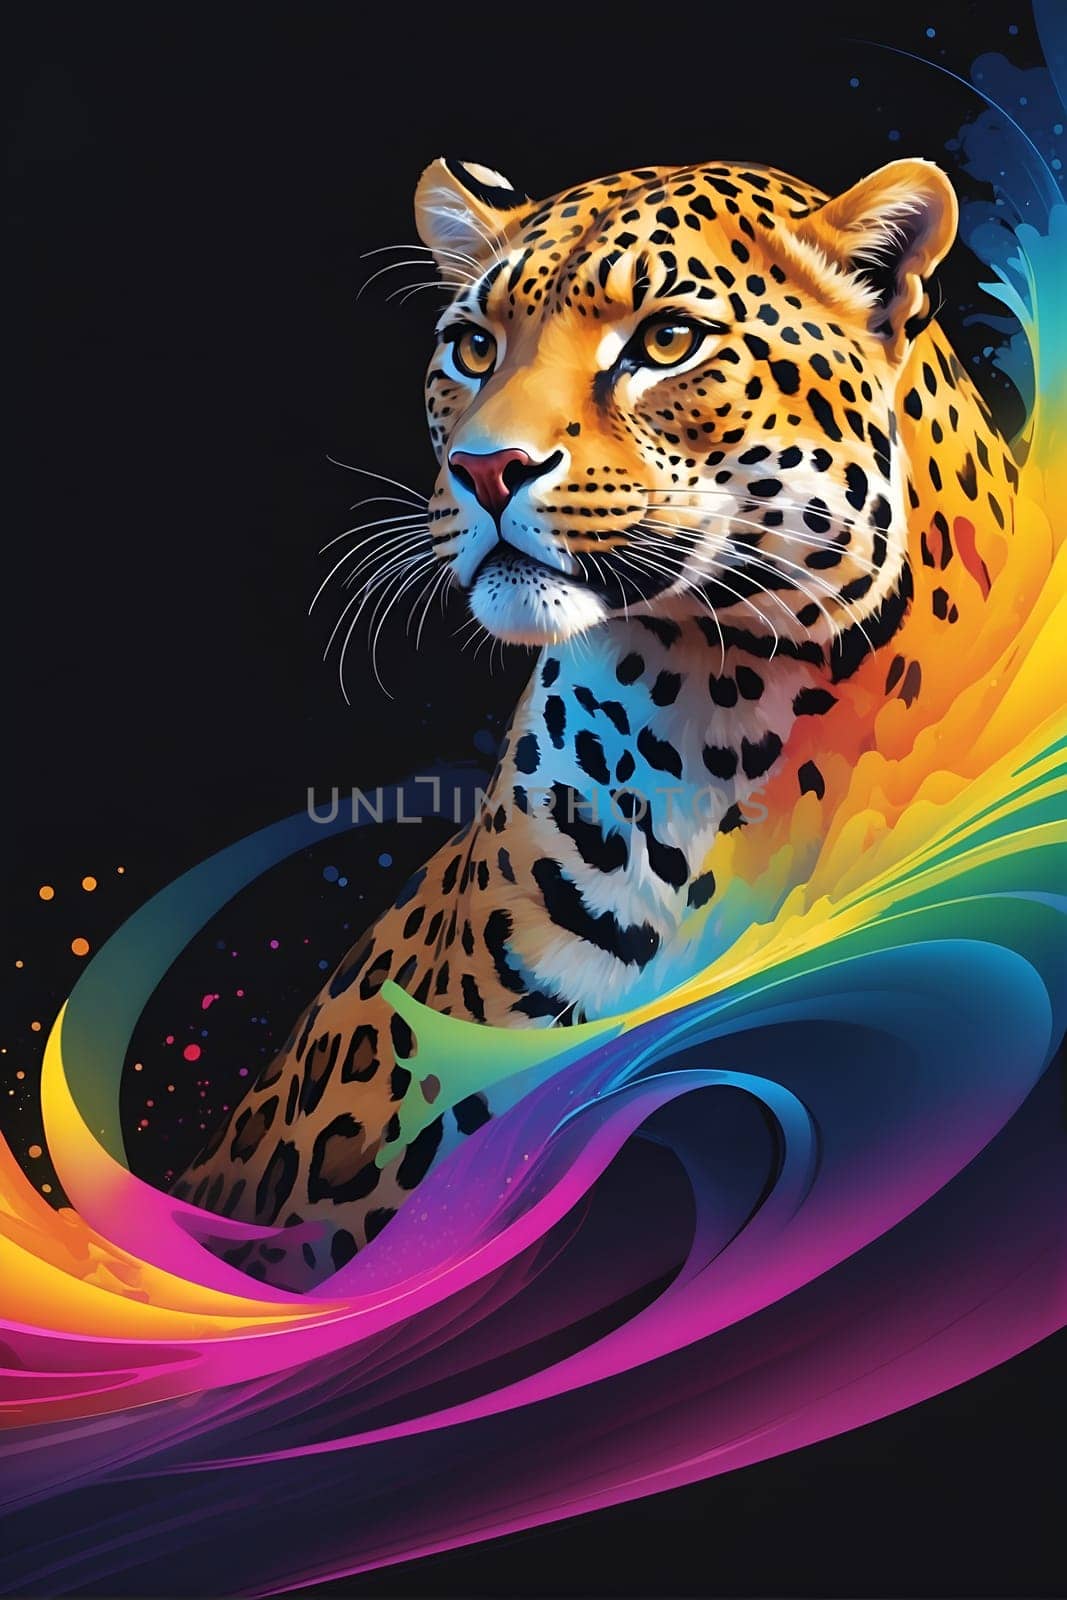 This stunning painting showcases the beauty and power of a leopard, rendered against a dramatic black background.